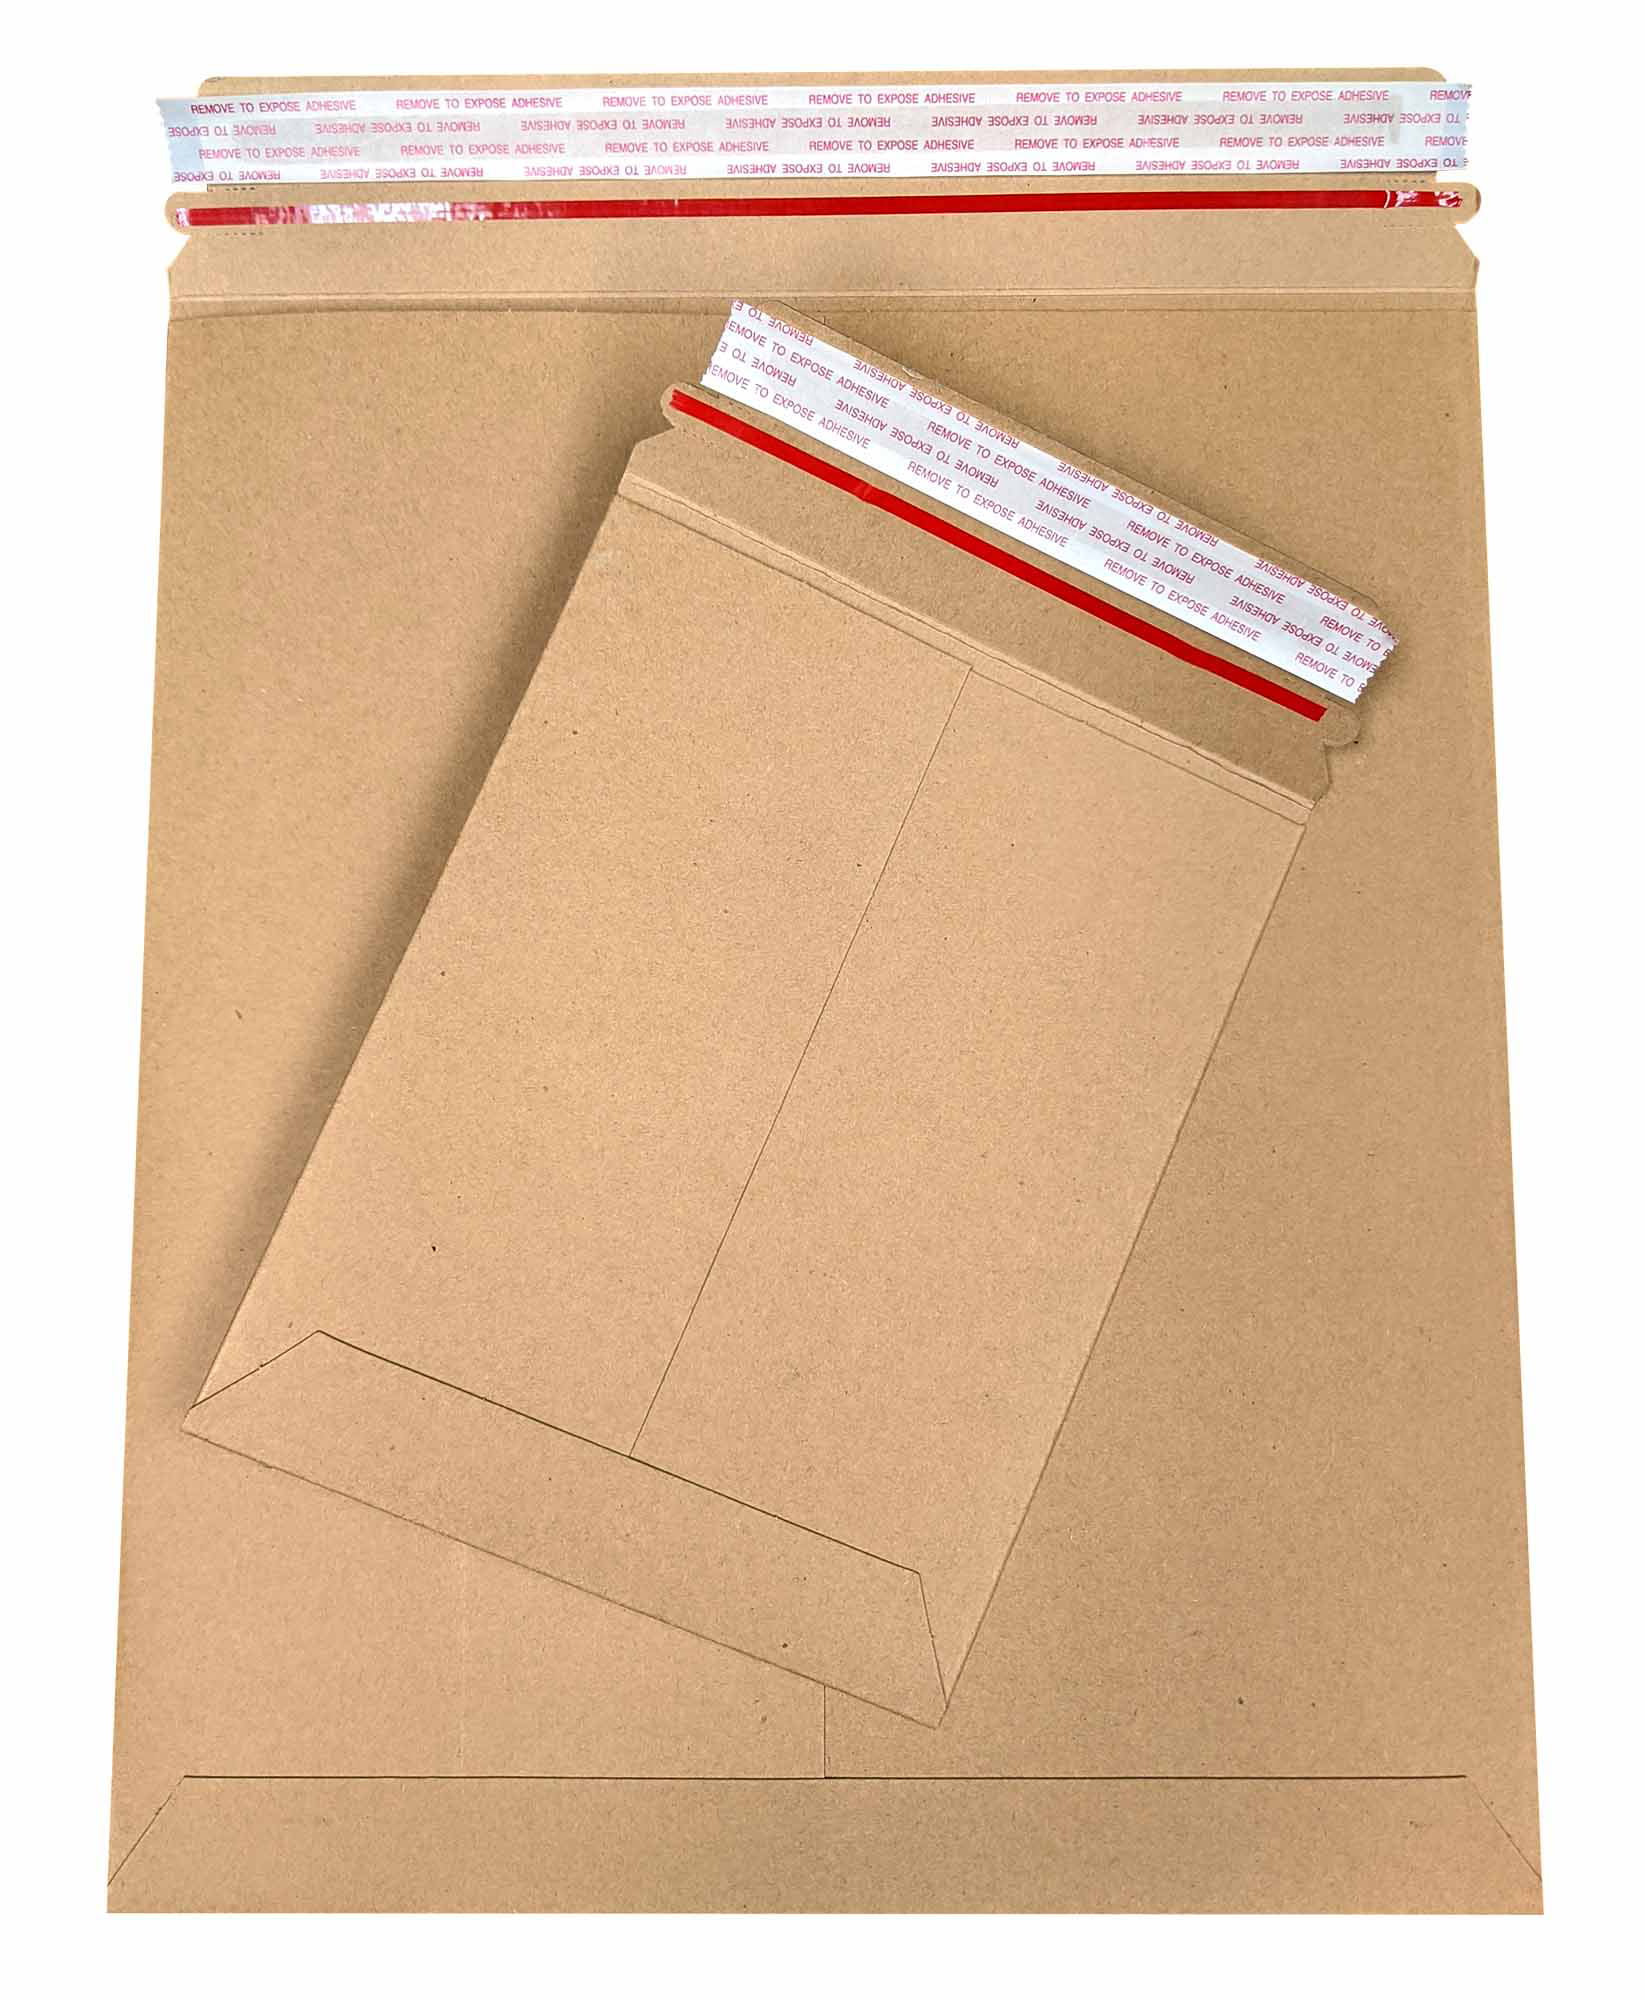 12.75"x15" RIGID PHOTO MAILERS ENVELOPES FLAT DOCUMENT SELF SEAL 100 to 1000 